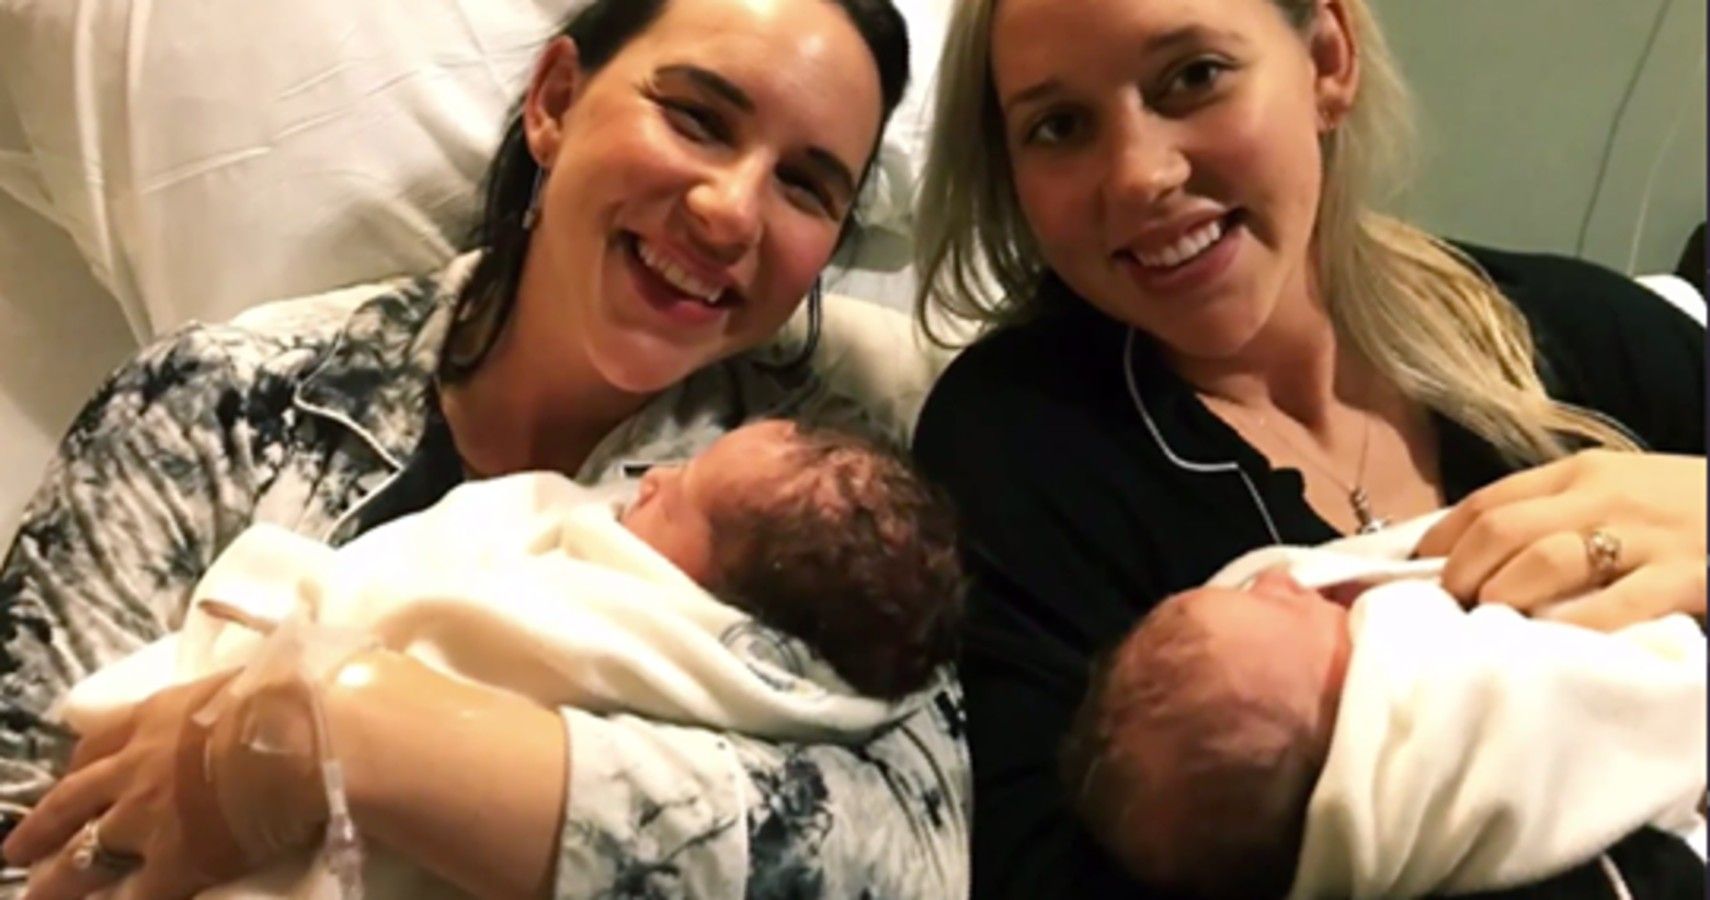 Sisters give birth 90 minutes apart